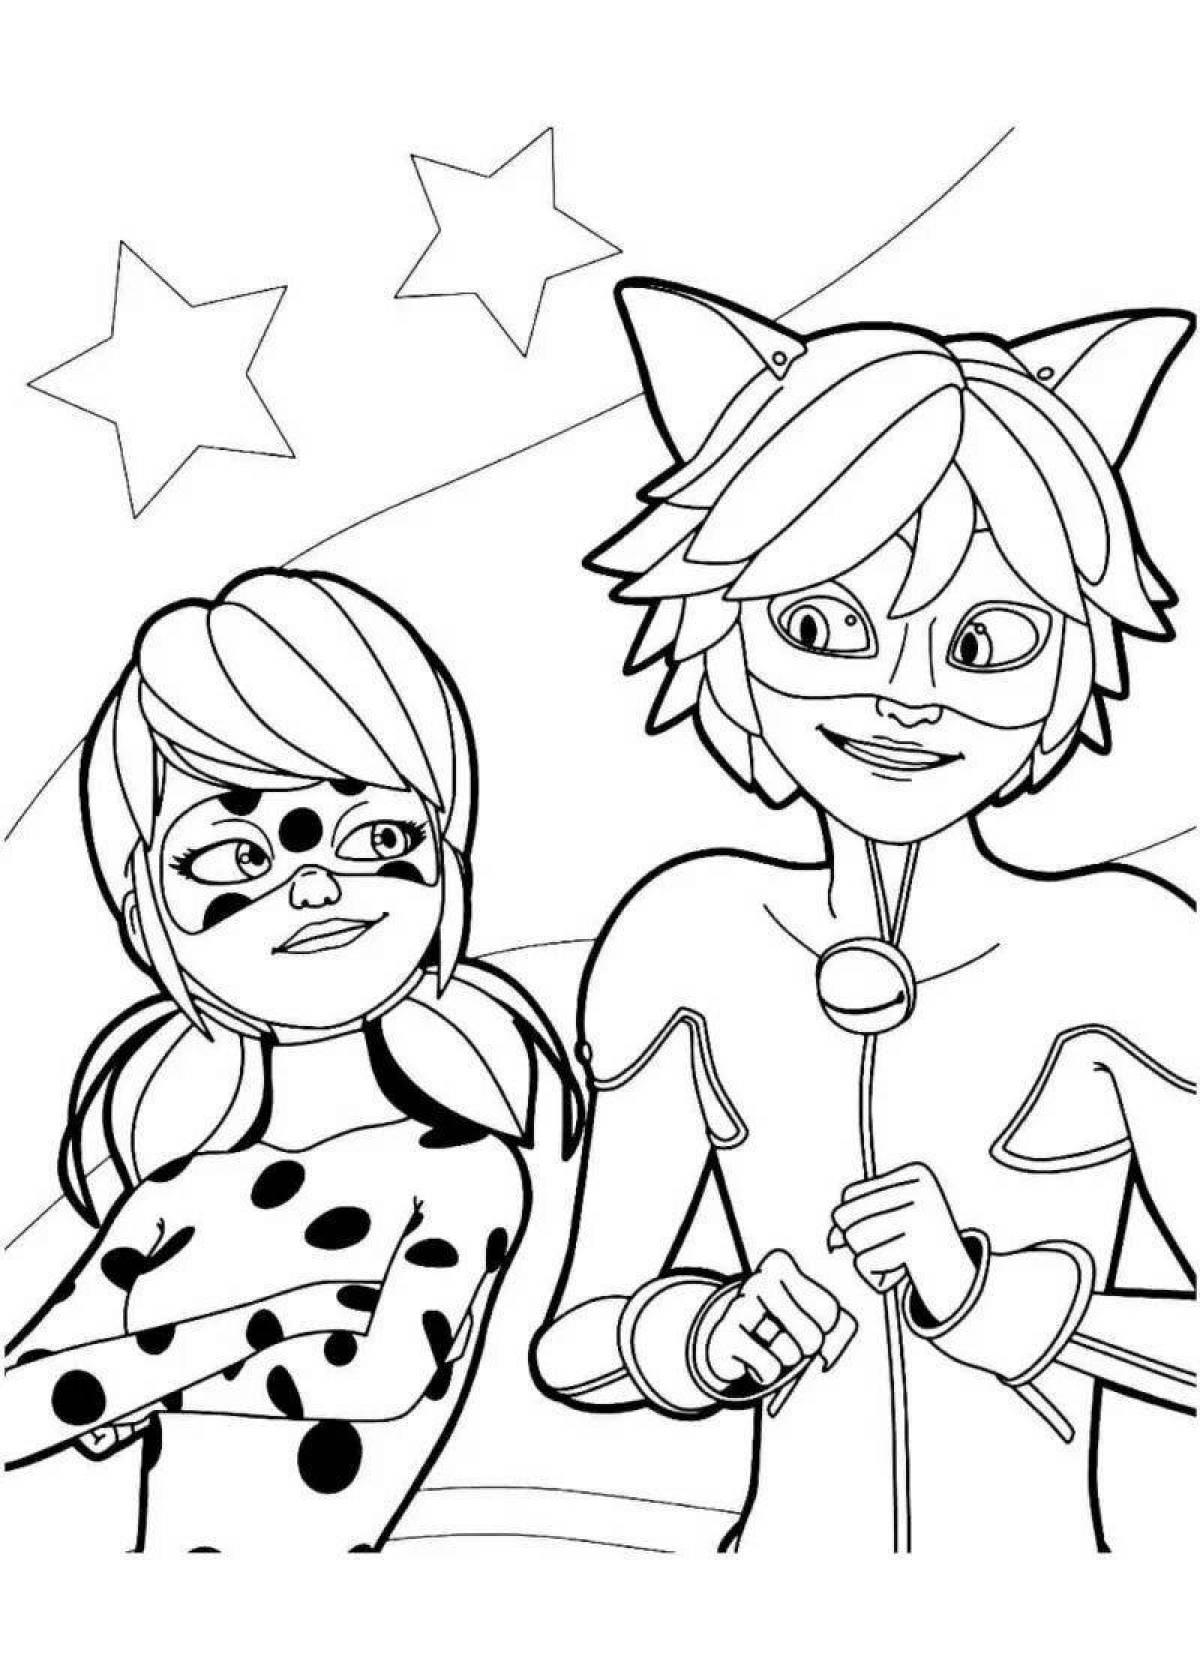 Coloring playful ladybug and super cat